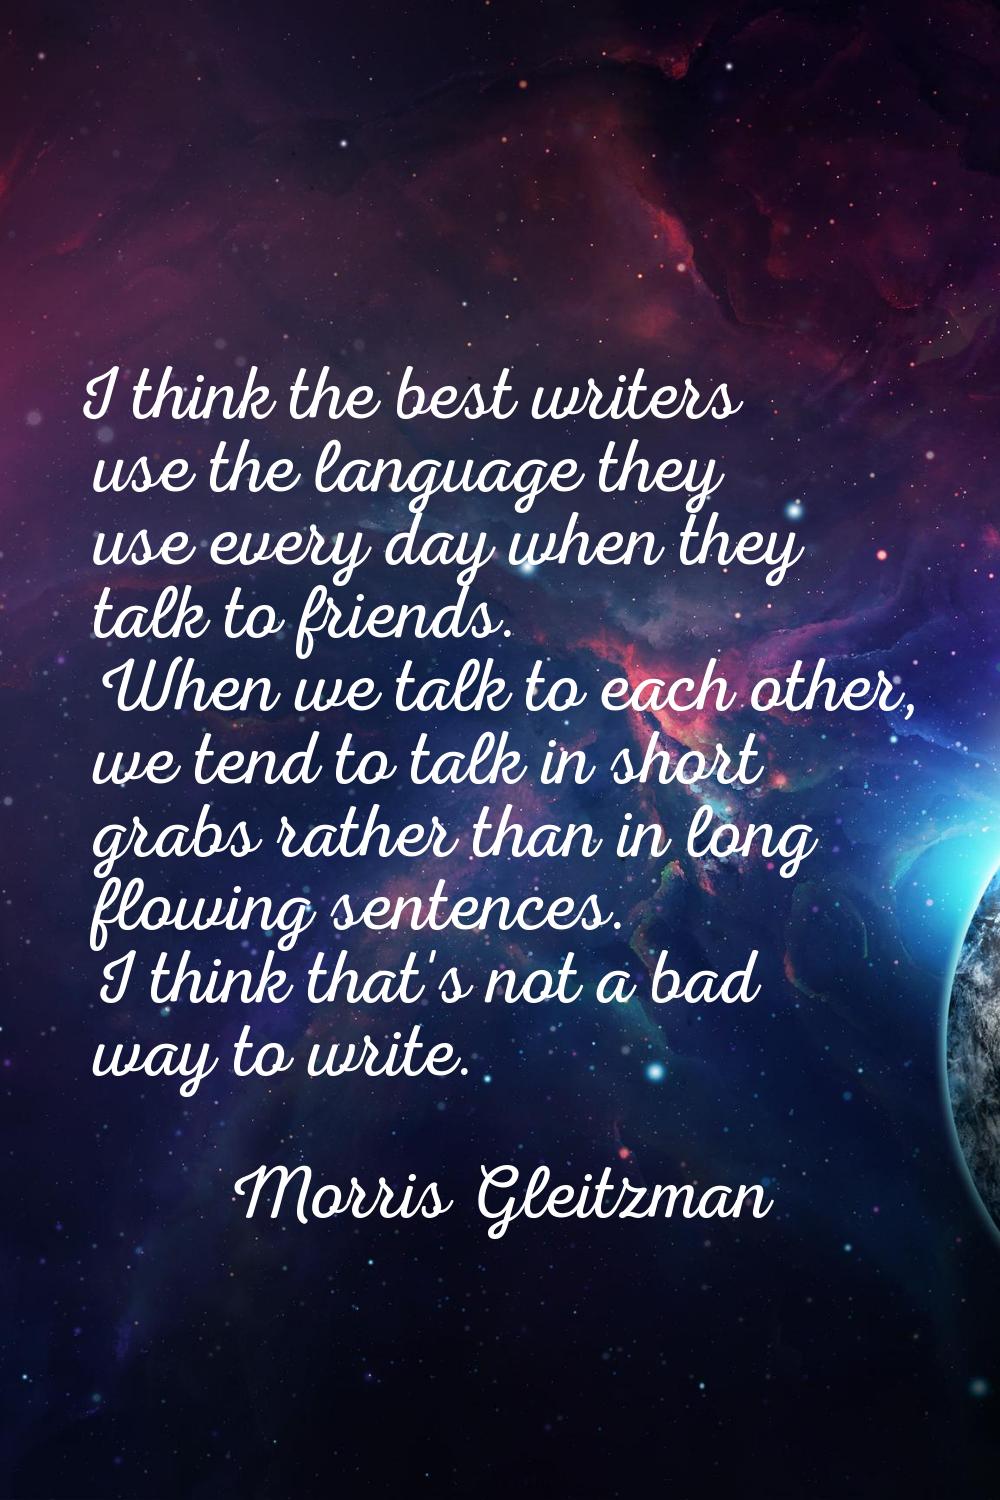 I think the best writers use the language they use every day when they talk to friends. When we tal